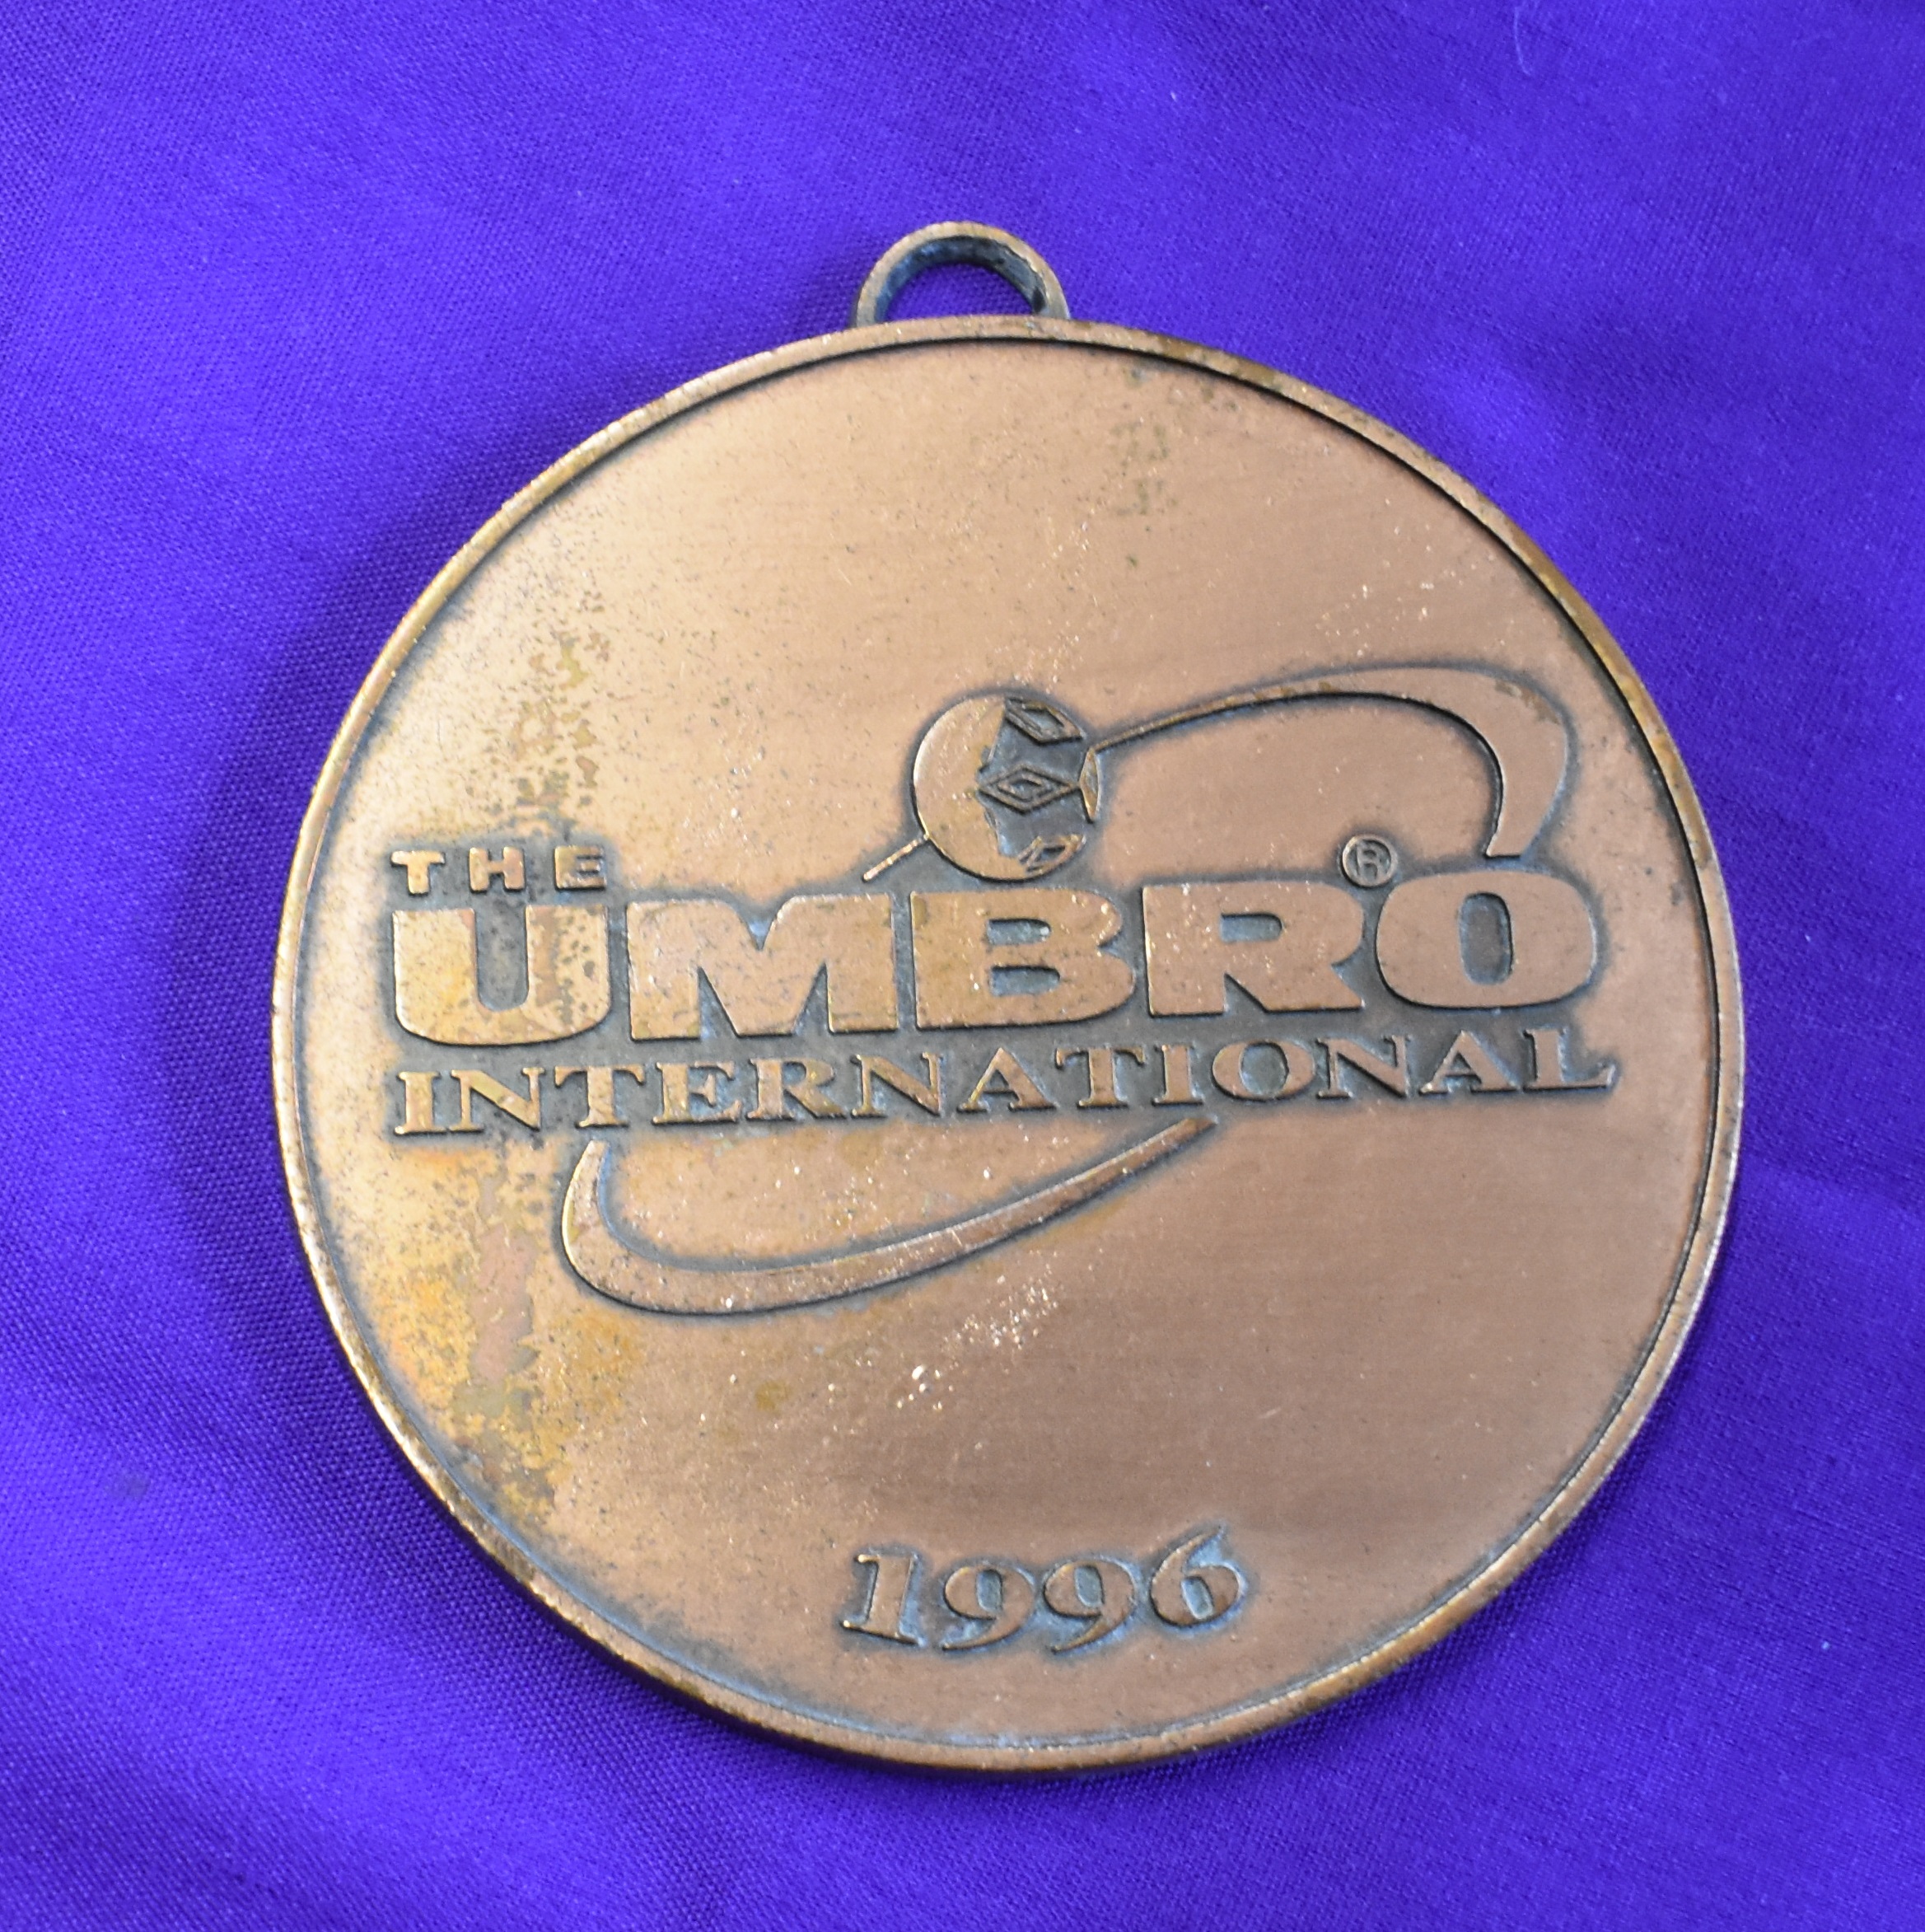 A medal presented to a Manchester United player from the Umbro International Tournament after the